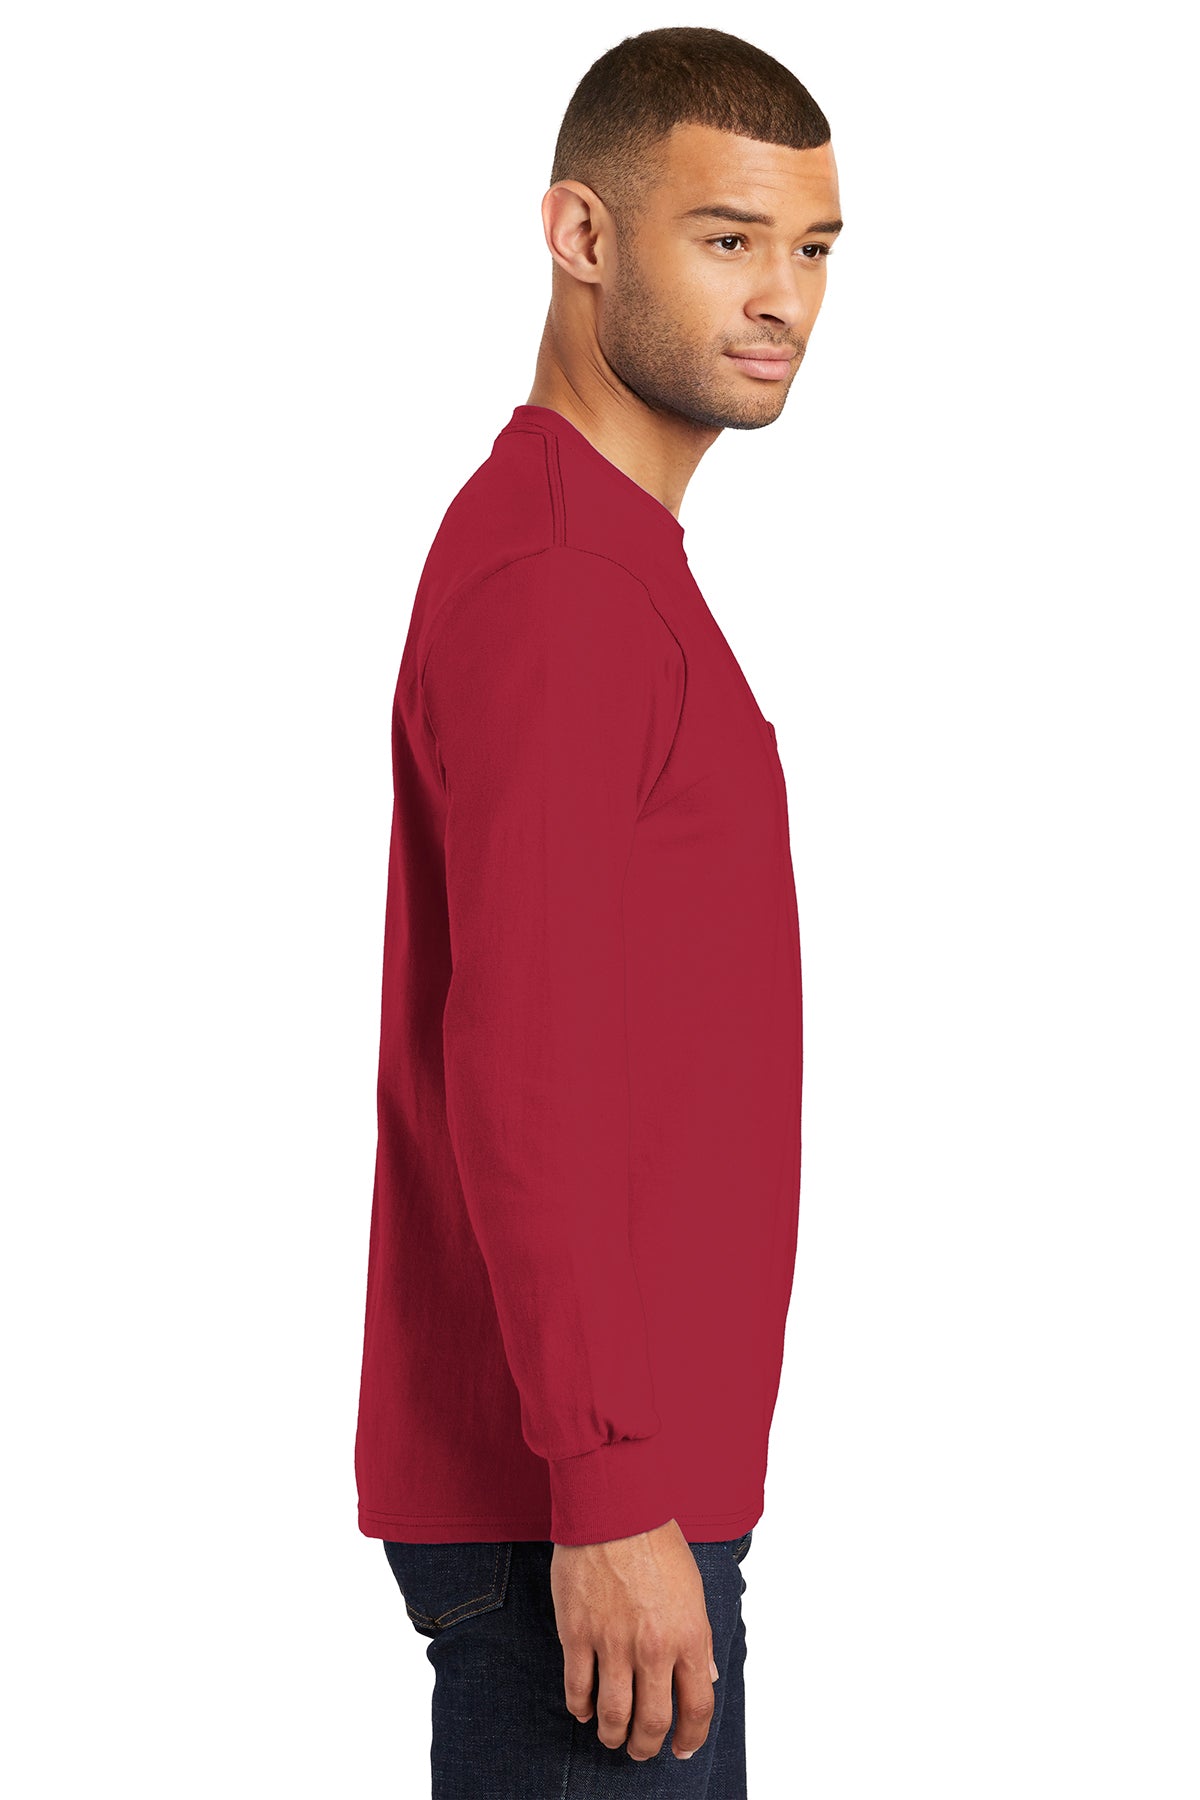 Port & Company Tall Long Sleeve Customized Essential Pocket Tee's, Red